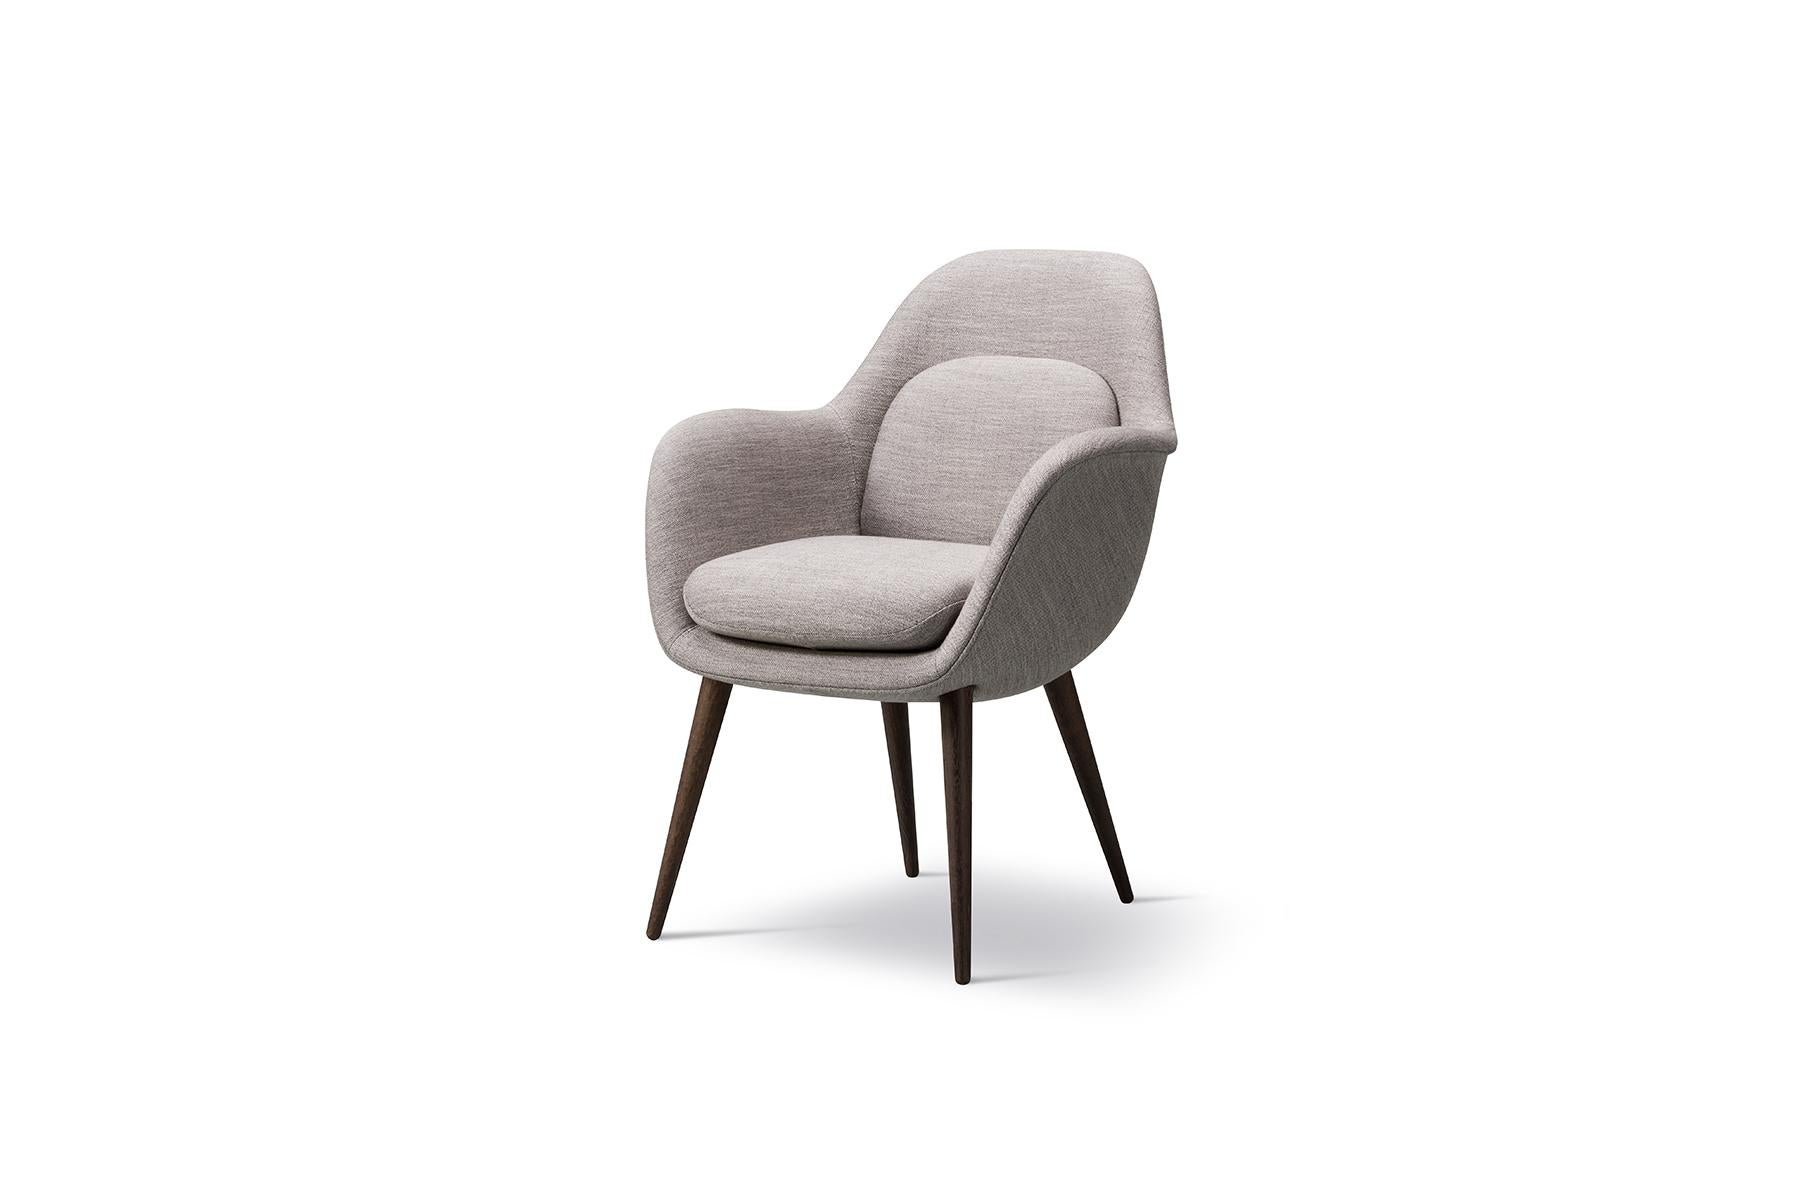 Space Copenhagen Swoon Chair – Two Tone is the smallest upright version of Swoon, is a size that’s even more compact. With its singular shell merging the armrests, seat and back, in addition to the supportive, soft cushions and choice of solid wood,